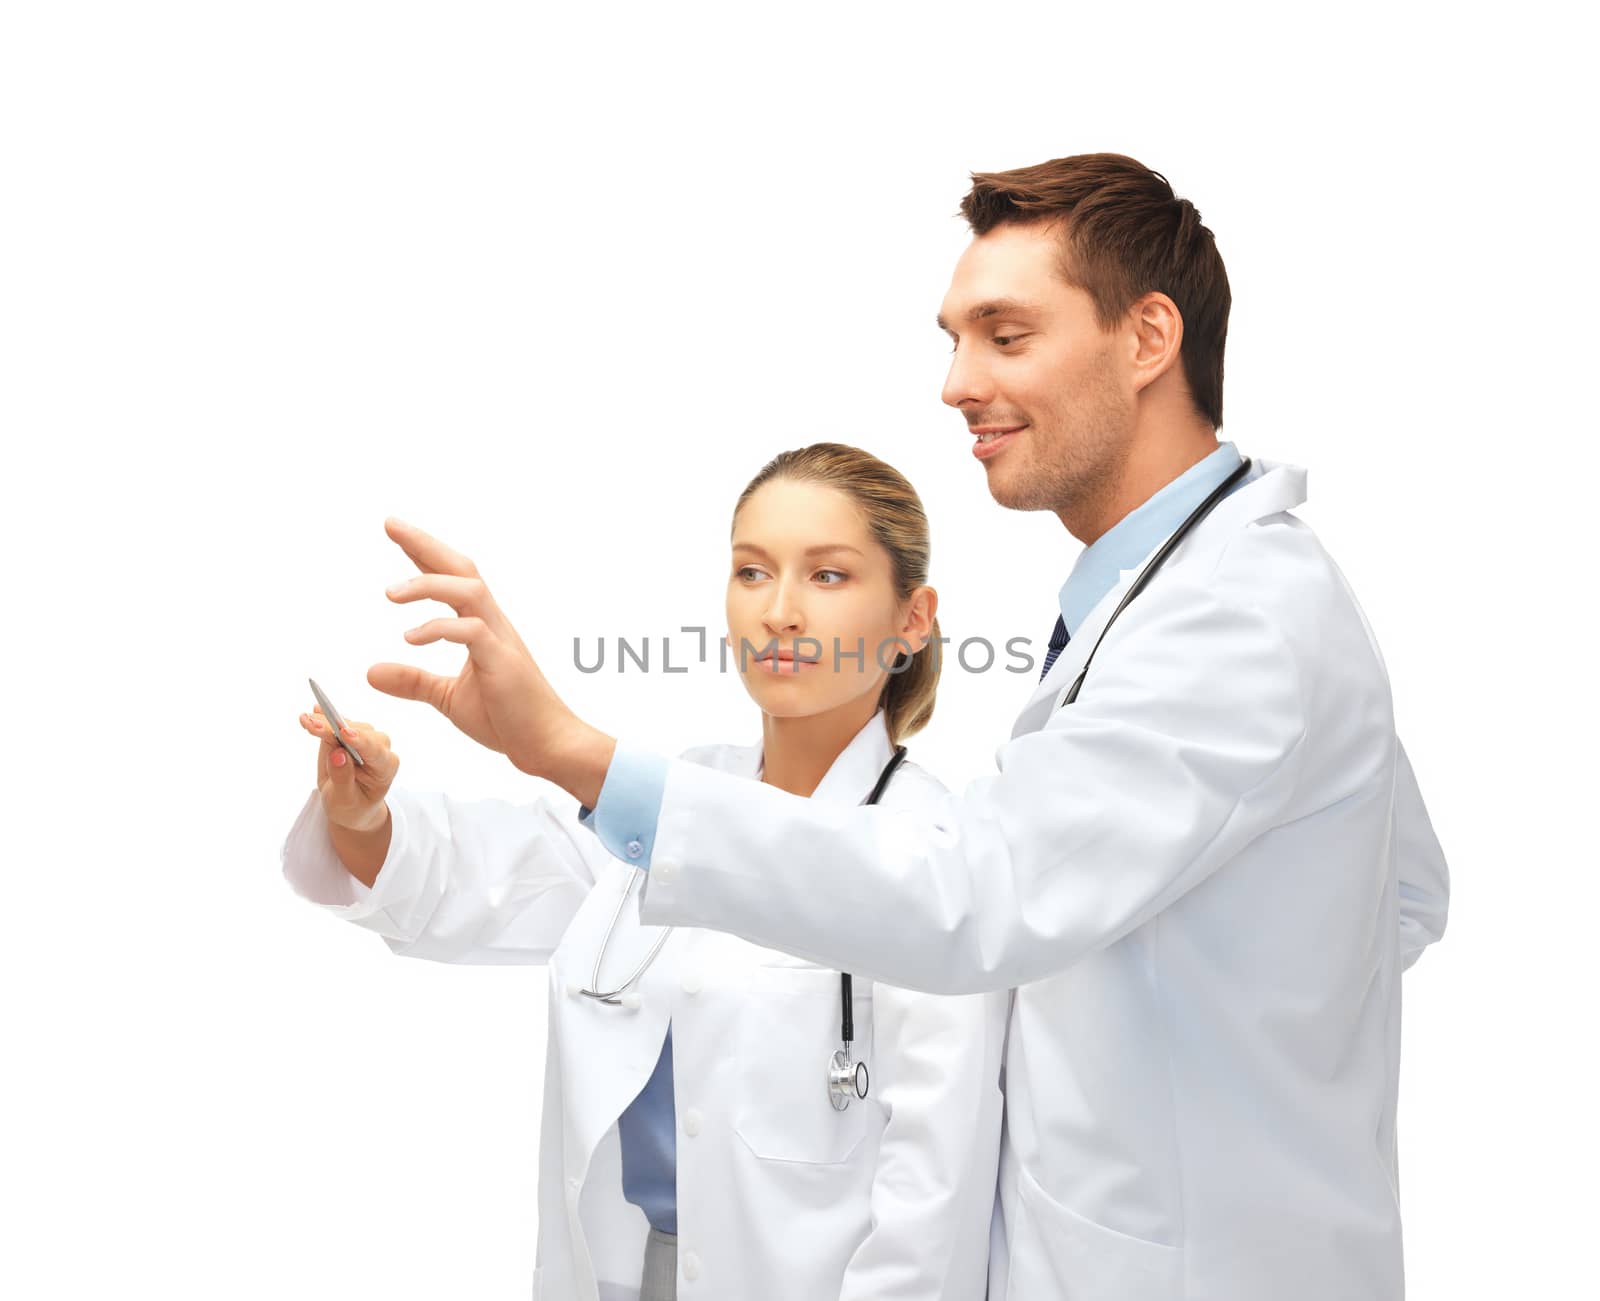 healthcare, medical and technology concept - two young doctors working with something imaginary